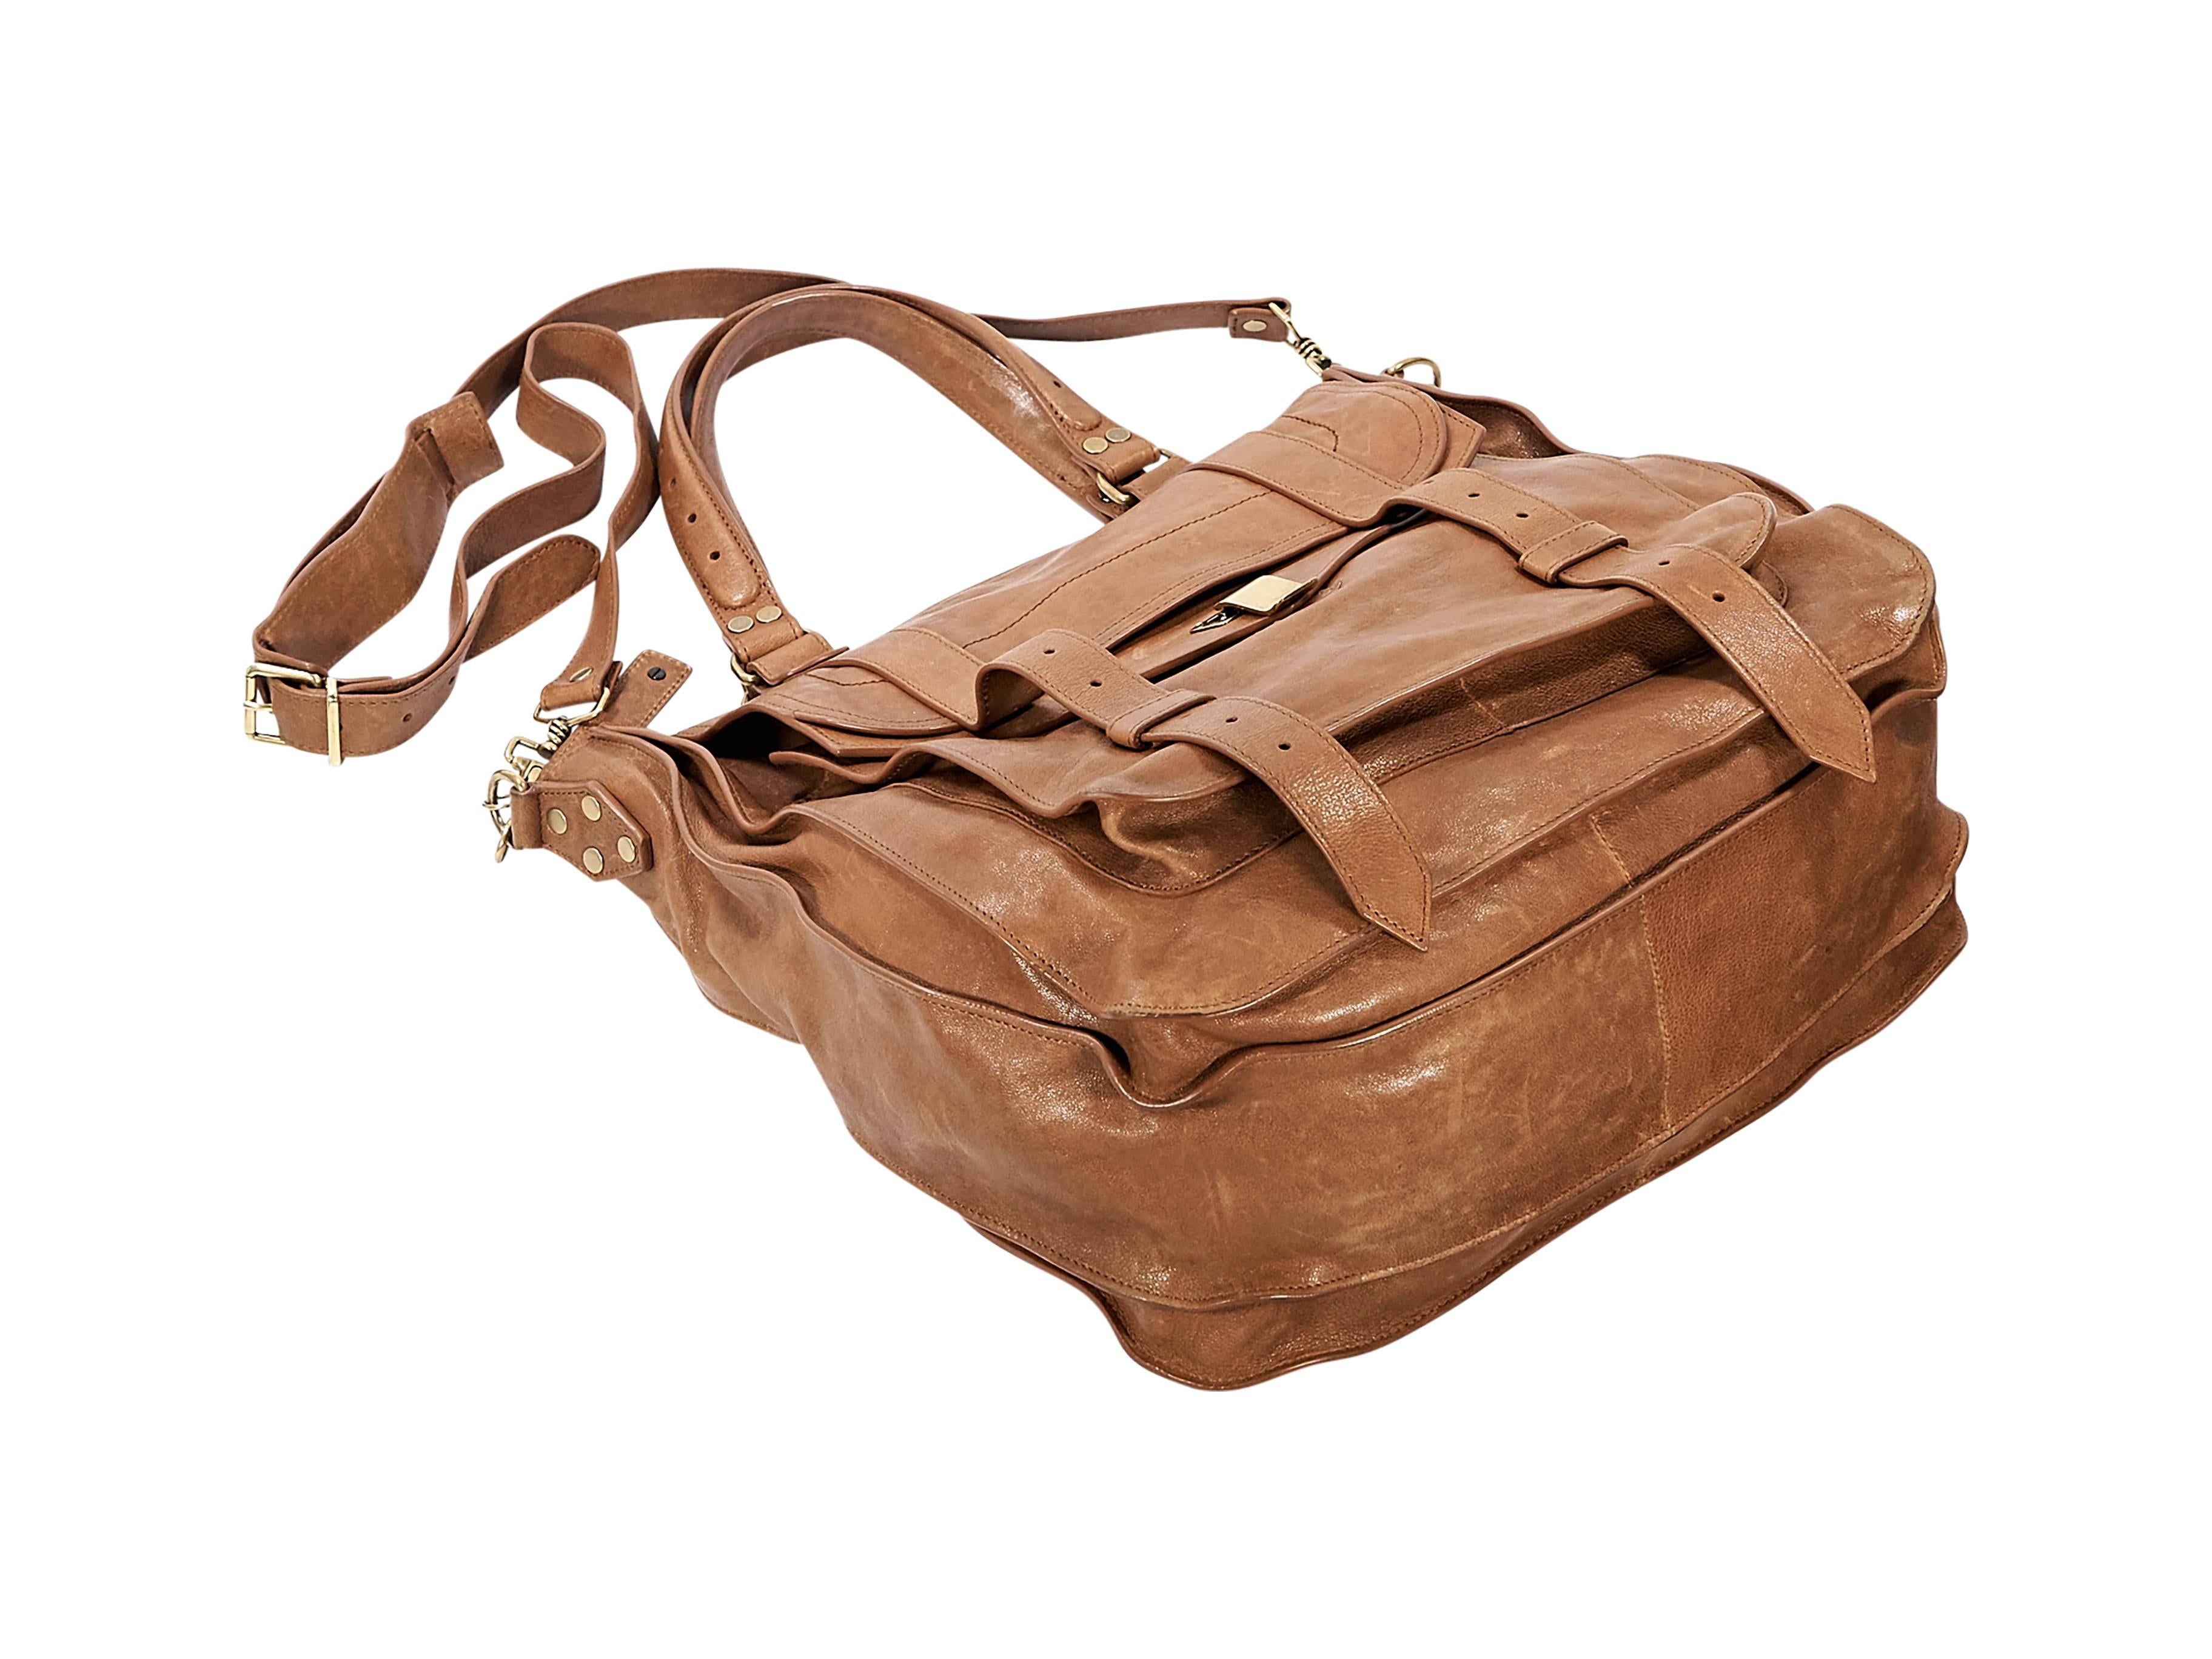 Product details: Tan leather PS1 satchel bag by Proenza Schoulder. Dual carry handles. Detachable, adjustable shoulder strap. Top zip closure. Front exterior flap pocket with flip-lock closure and buckle straps. Lined interior with inner slide and